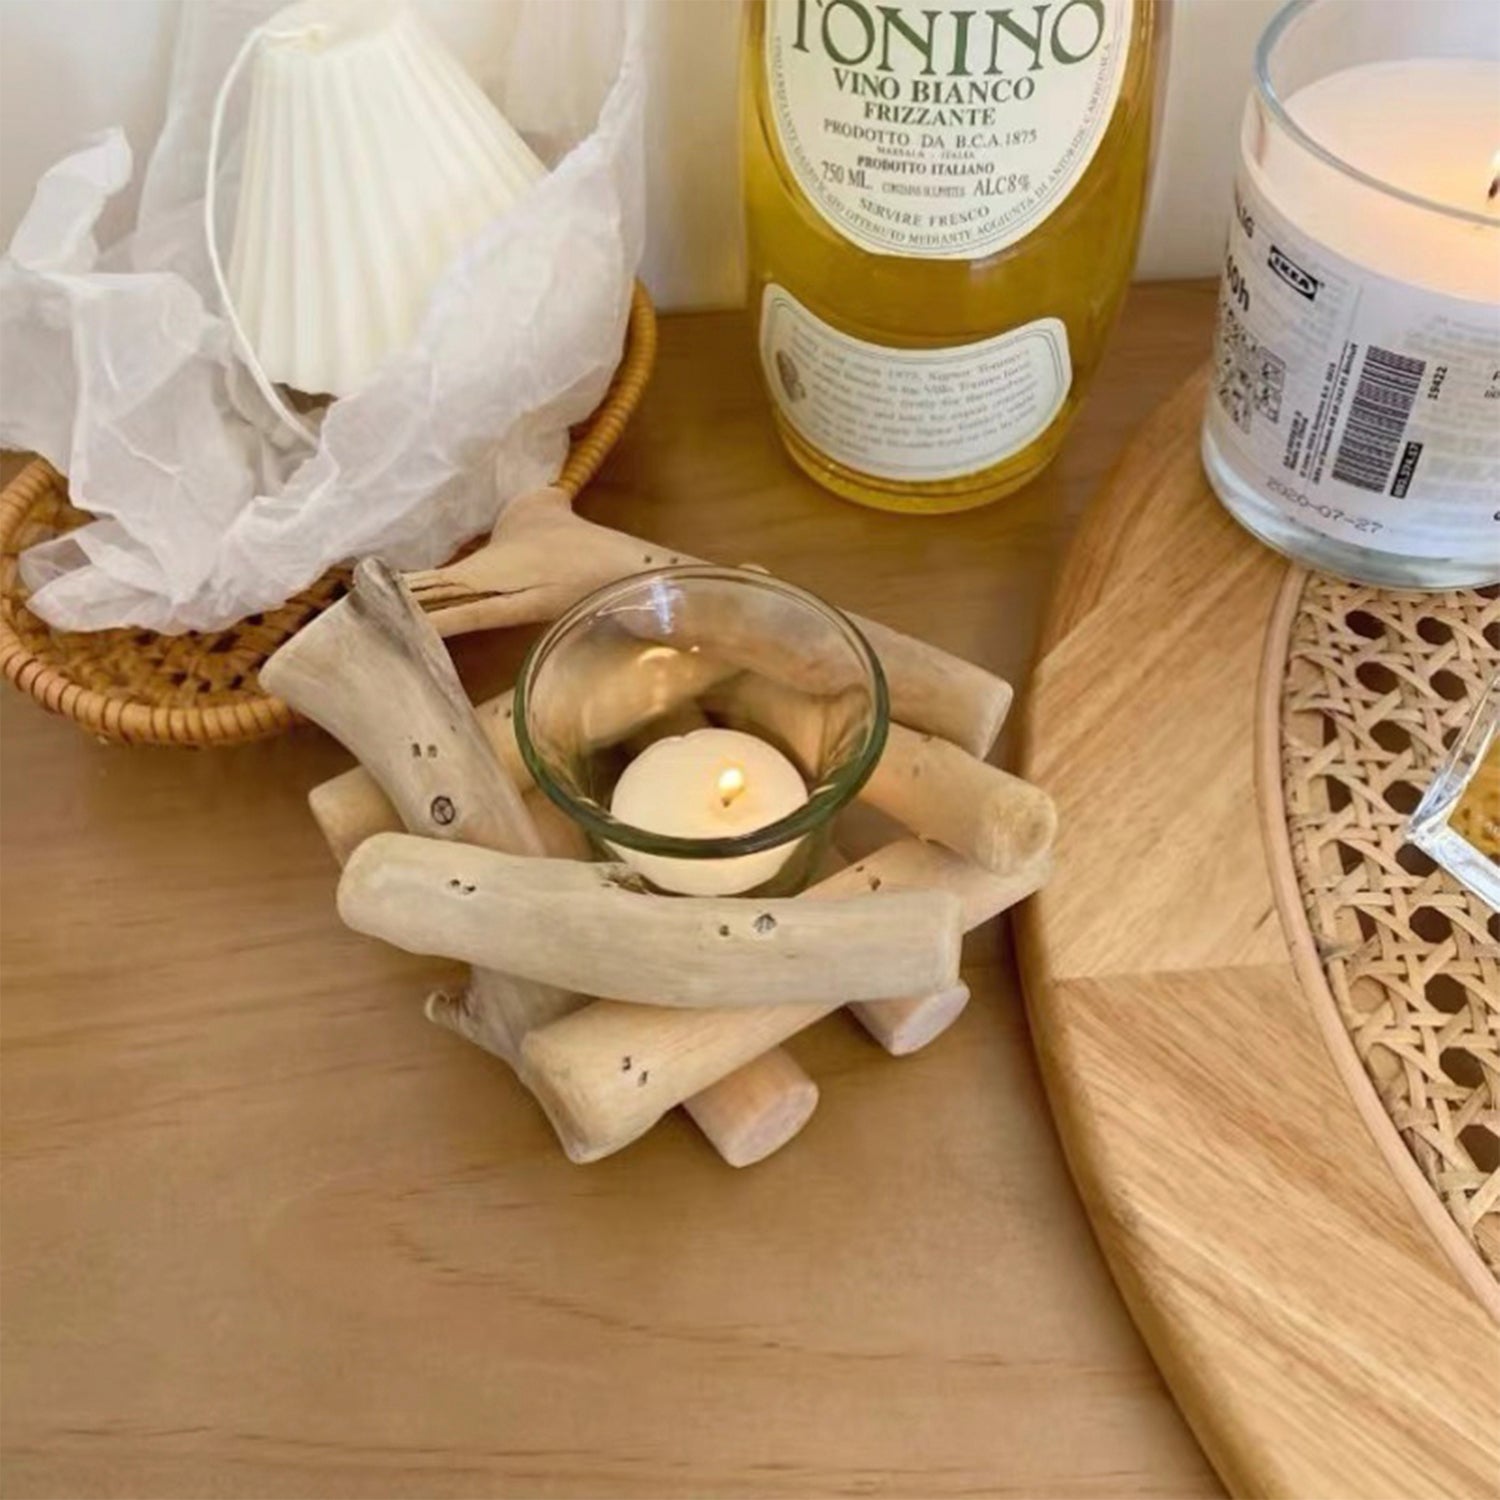 Wooden Tea Light Candle Holder Set  Rustic Wedding Decoration – the Peachy  Day